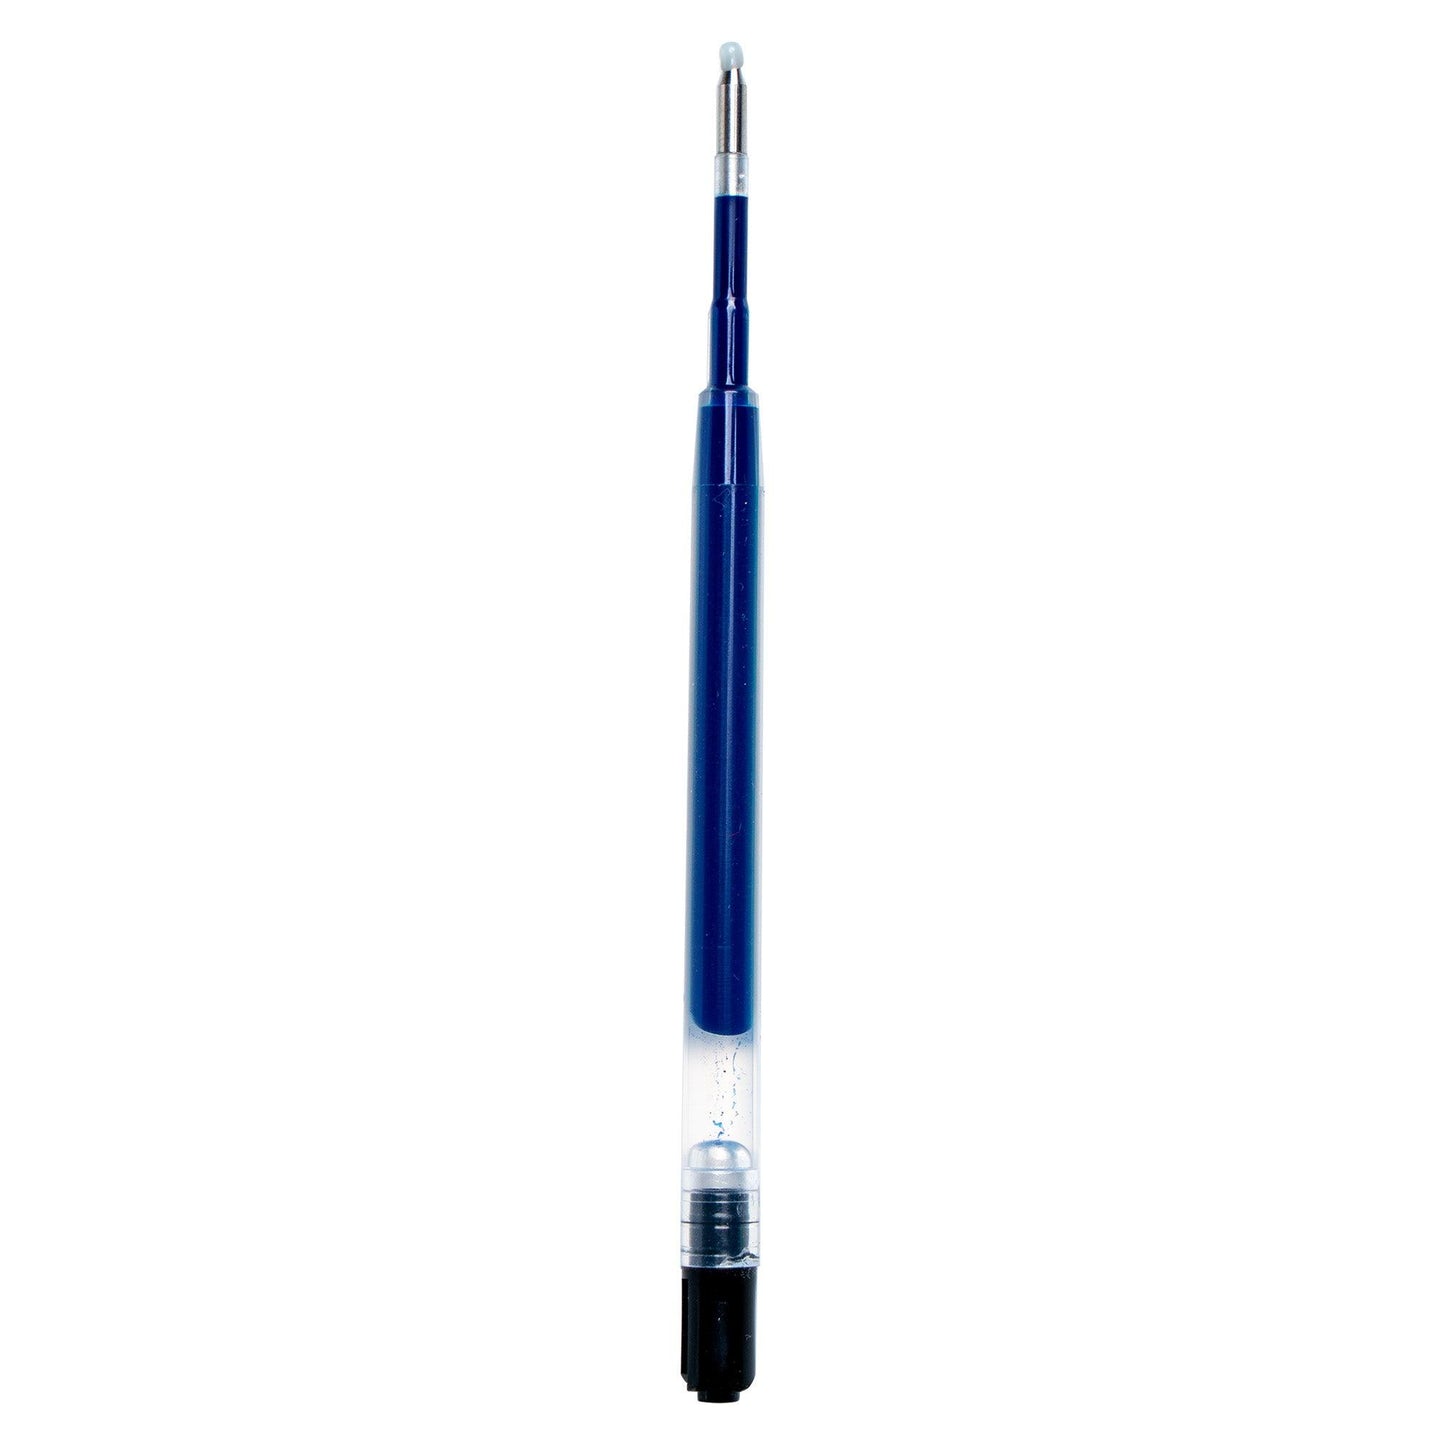 24ct - .5MM Blue Ink Refills for The Crafters Gel Pen